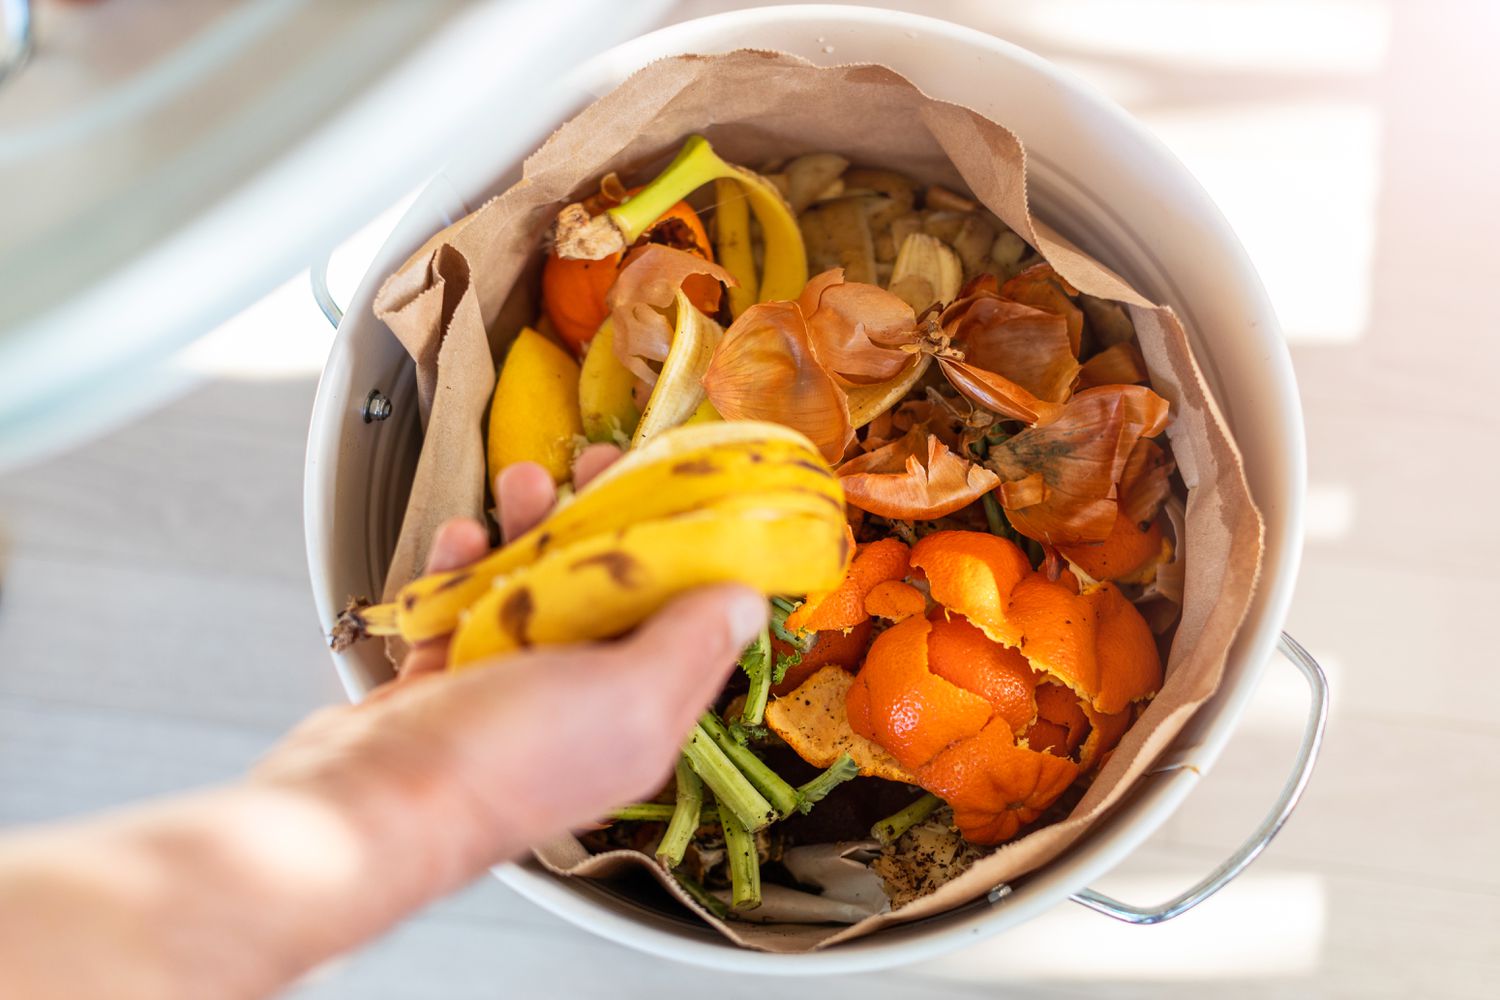 How To Store Food Scraps For Compost